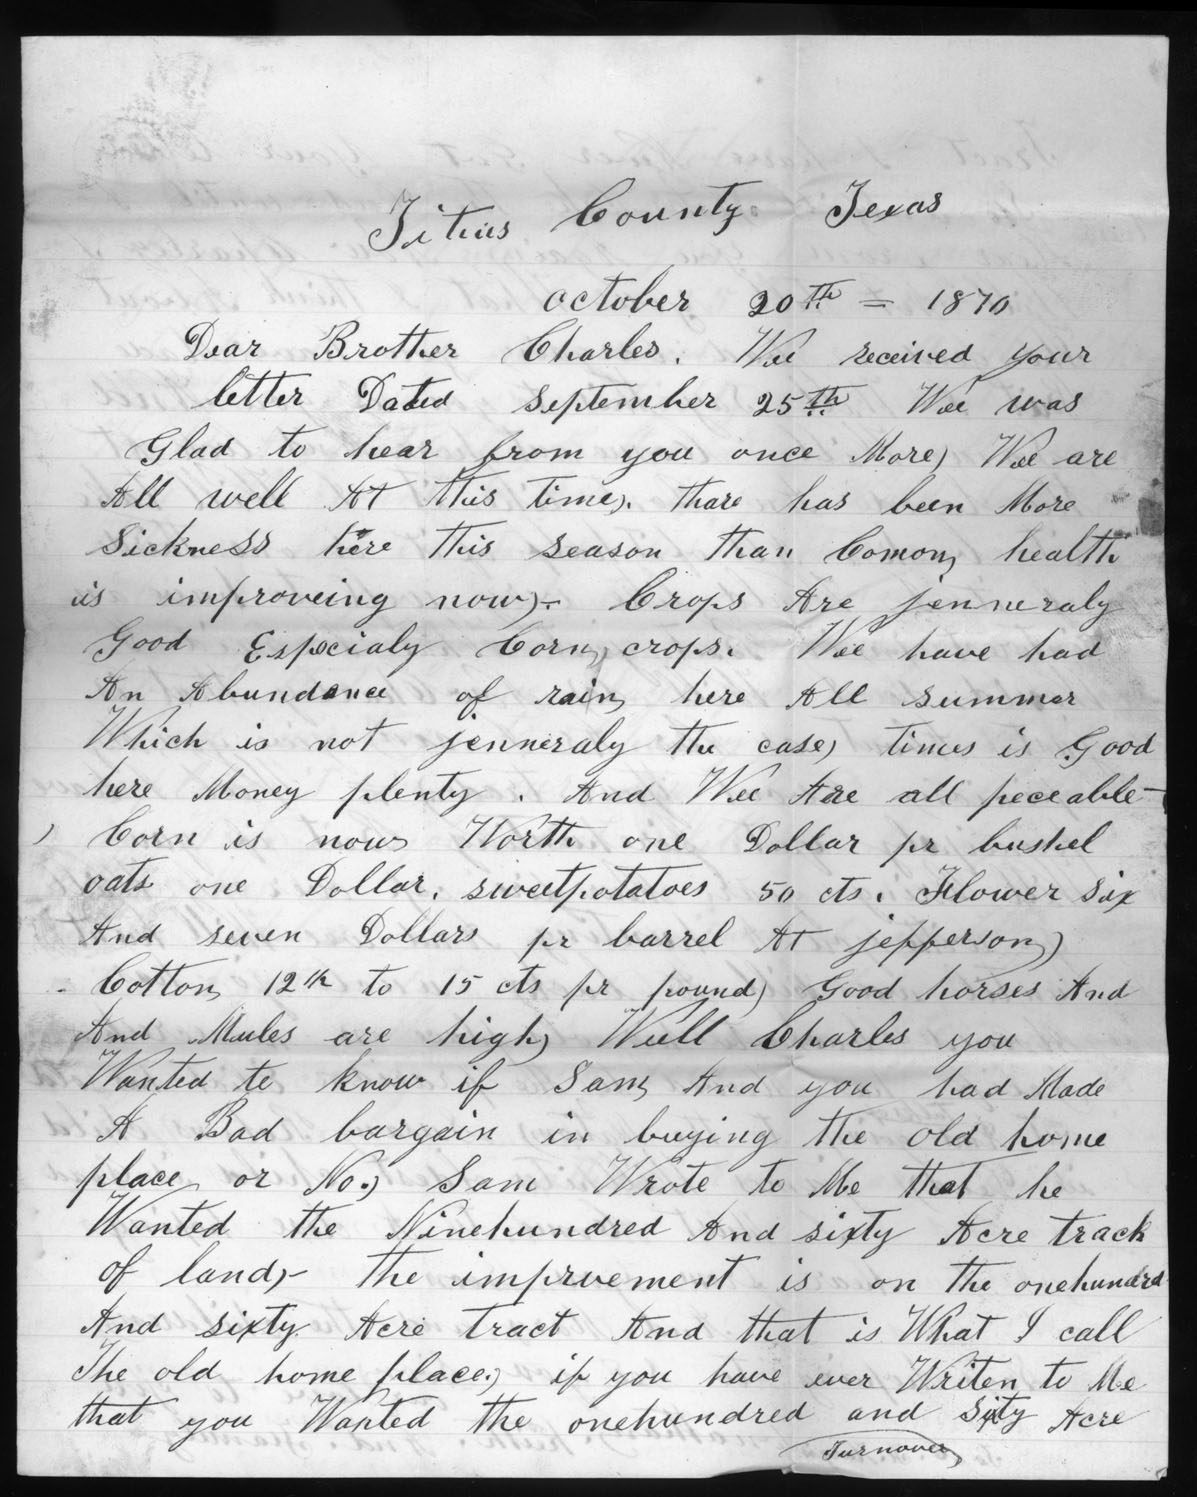 Letter, Jonathan and Mary Keith, Titus County, Texas, to Charles H. Hargis and Samuel Reeves